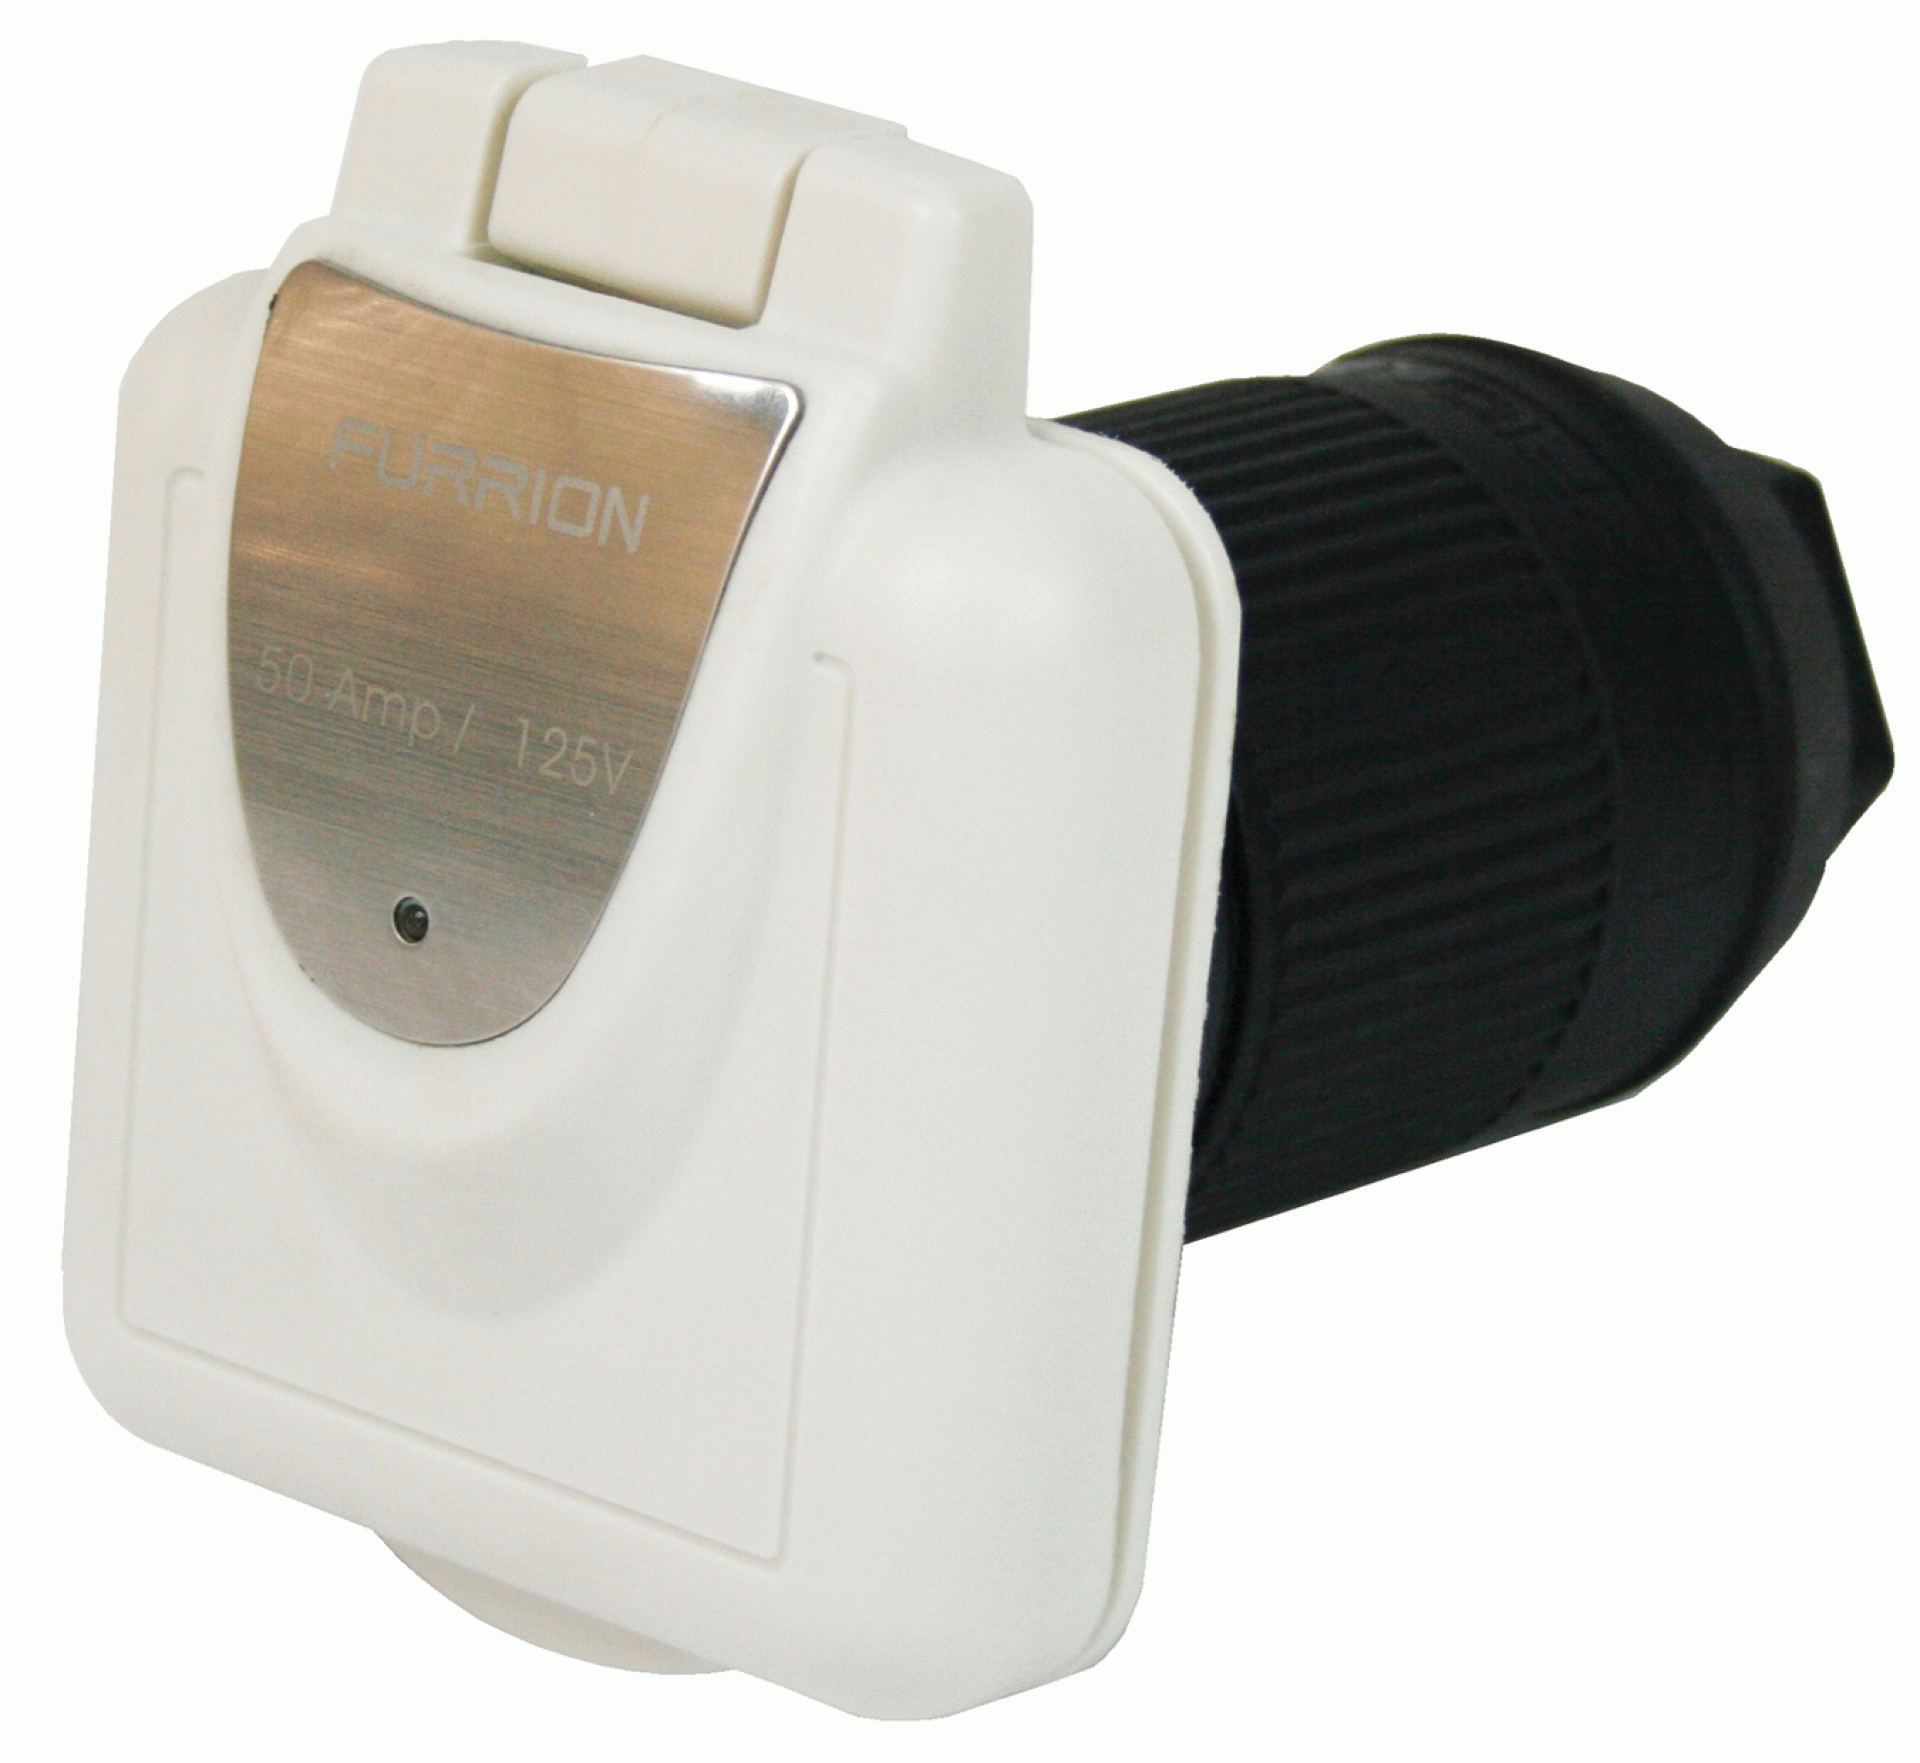 FURRION LLC | 2021123658 | 50 AMP 125V 3 WIRE POWER INLET SQUARE NON METALLIC W/ STAINLESS PLATE F50INS-PS-AM